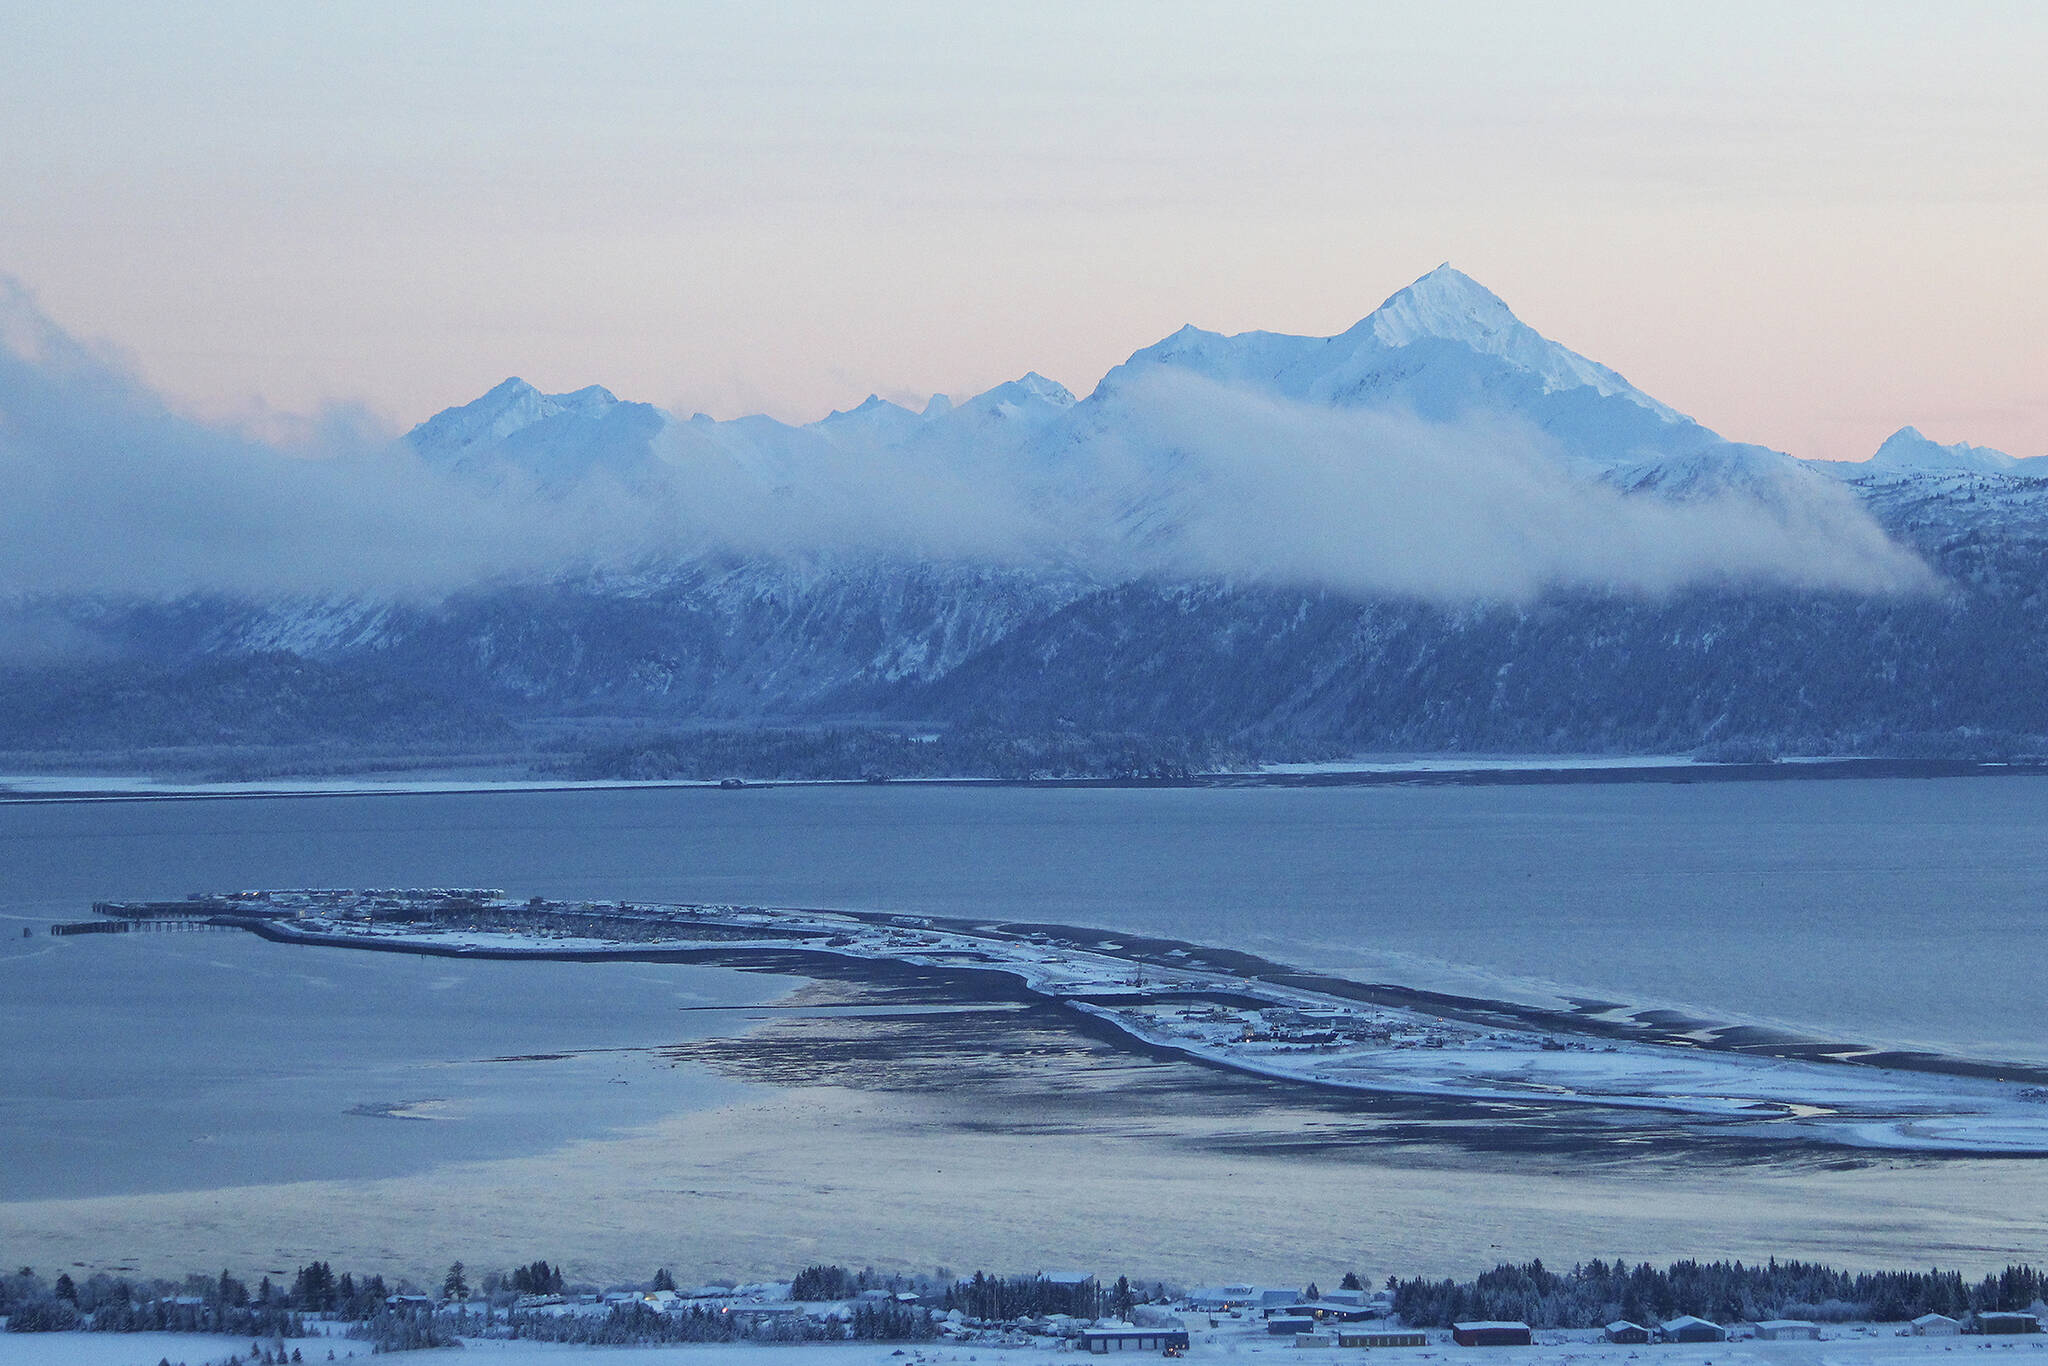 The Homer Spit stretching into Kachemak Bay is seen here on Thursday, Dec. 10, 2020 in Homer, Alaska. (Photo by Megan Pacer/Homer News)